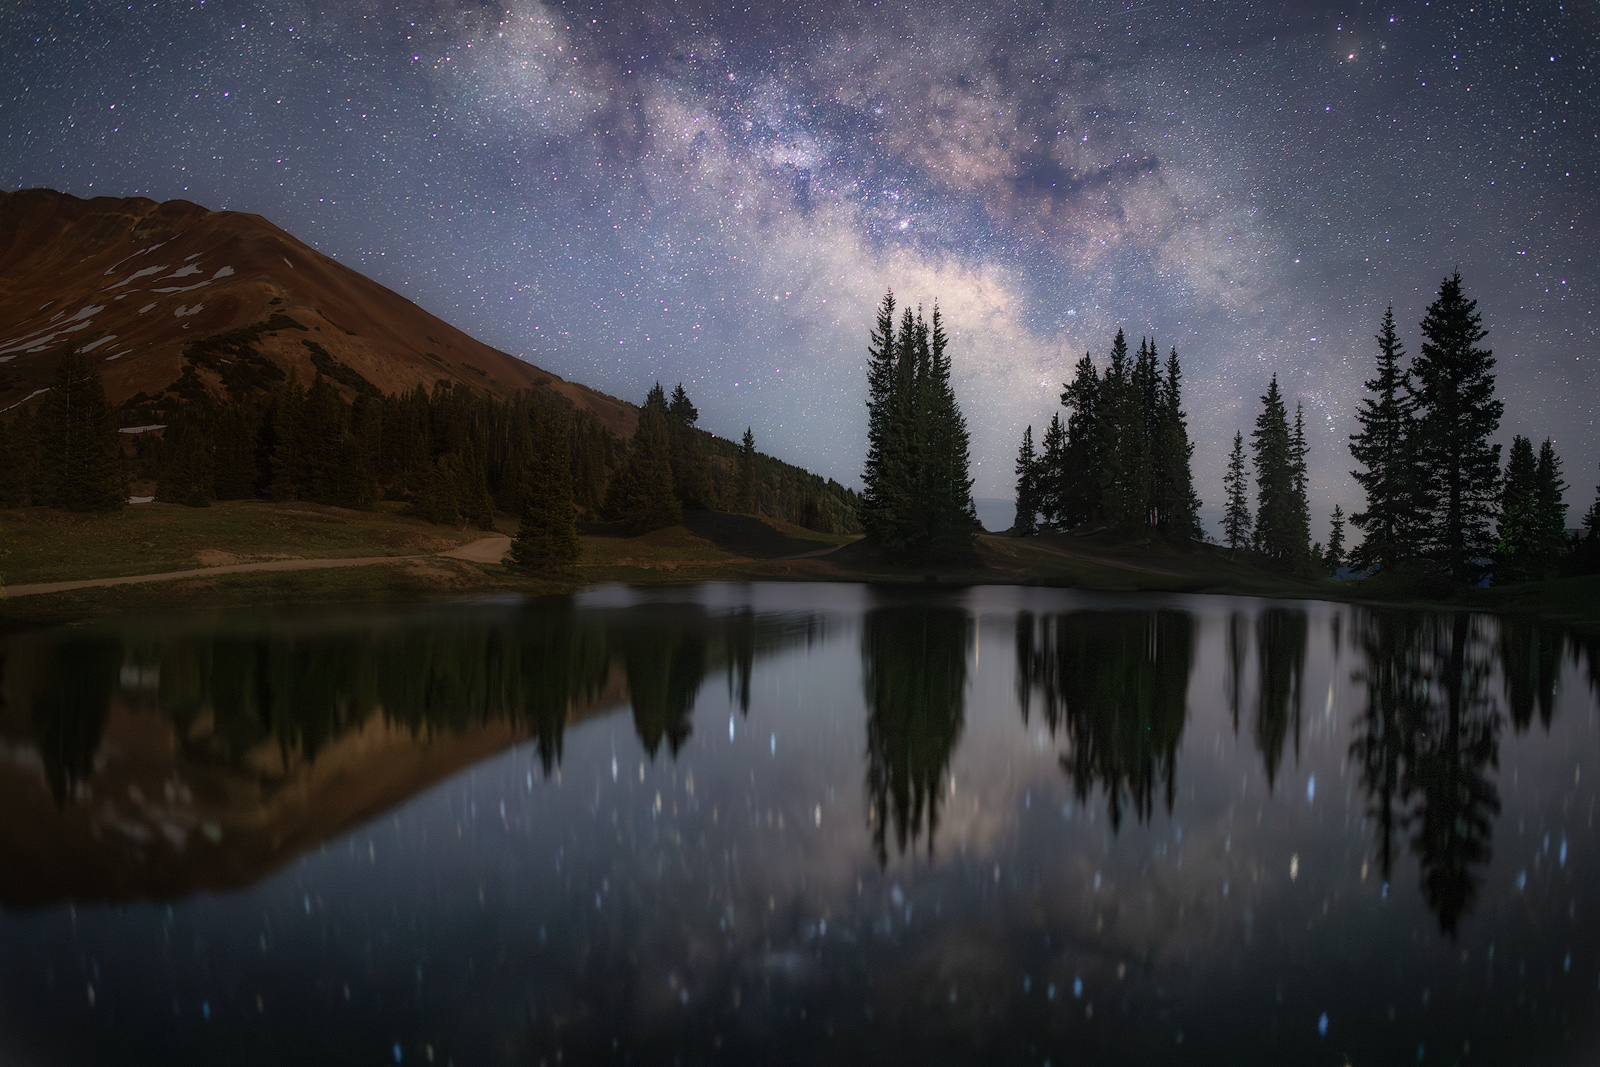 A pond at high altitude reflects the core of the Milky Way.